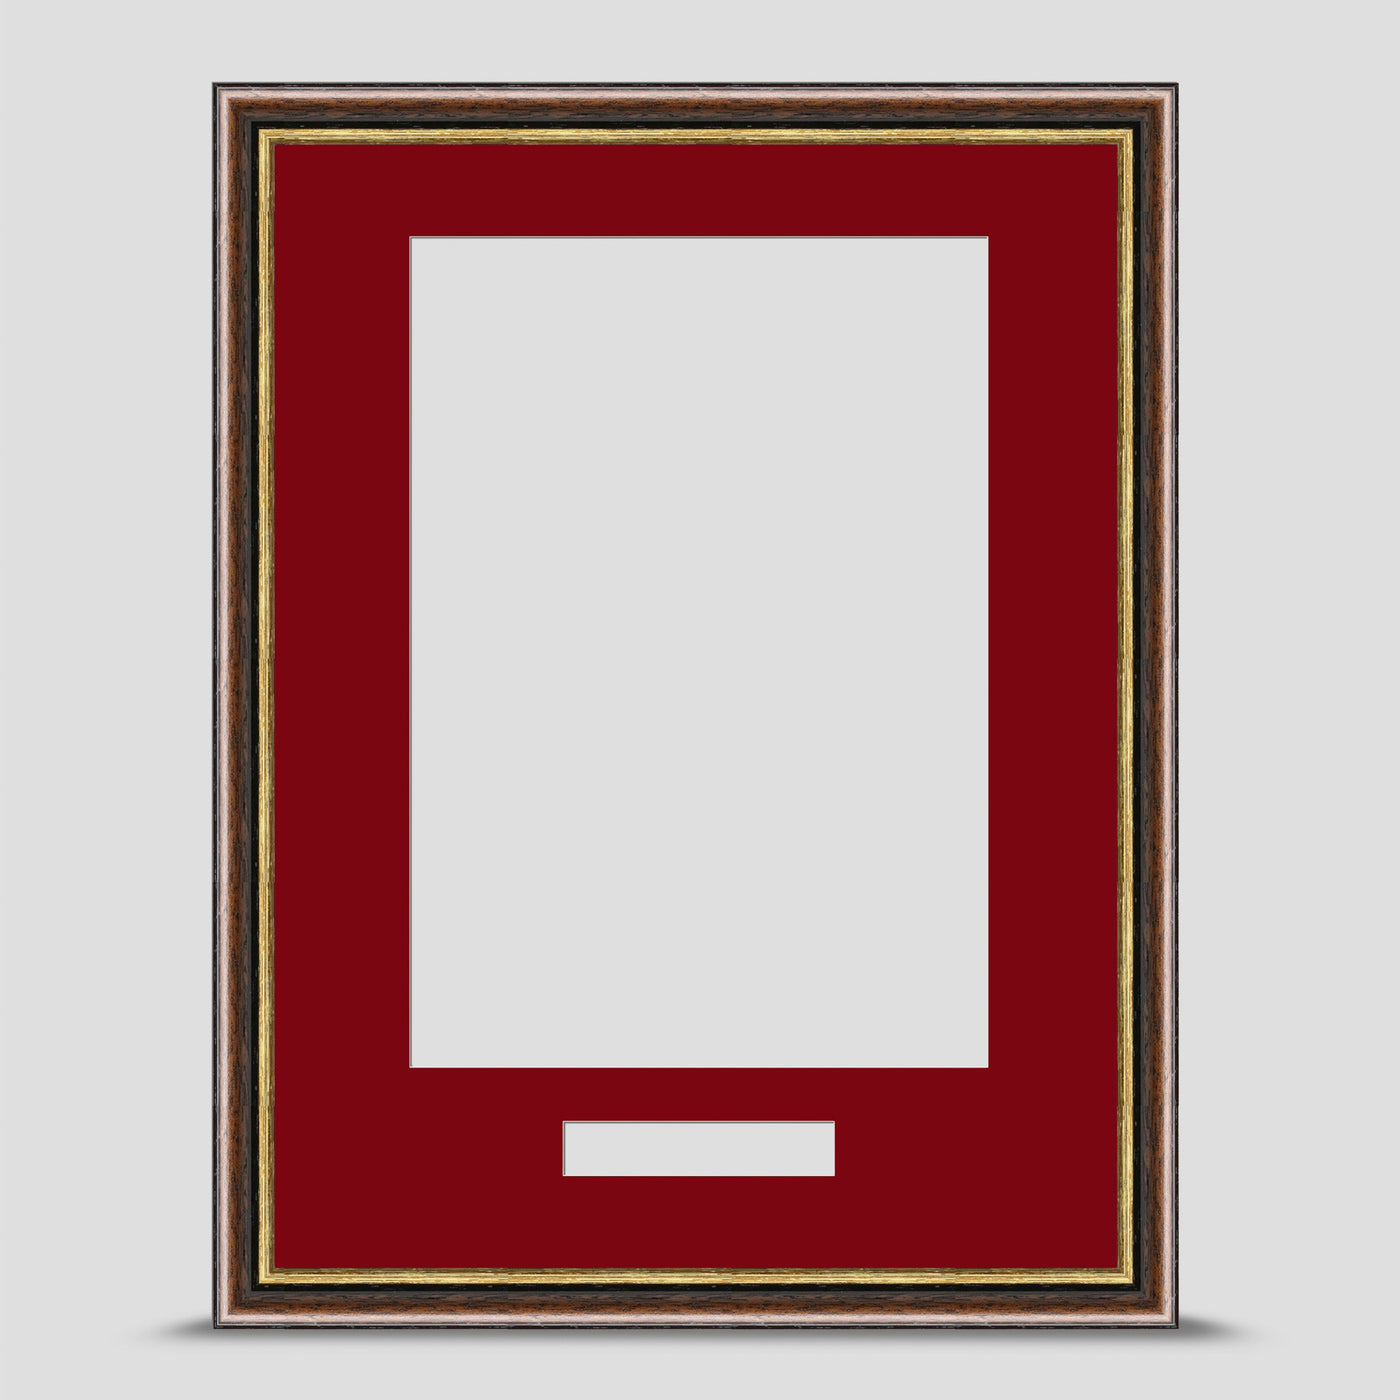 16x12 Brown & Gold Picture Frame Including a A4 Mount with text box - Portrait